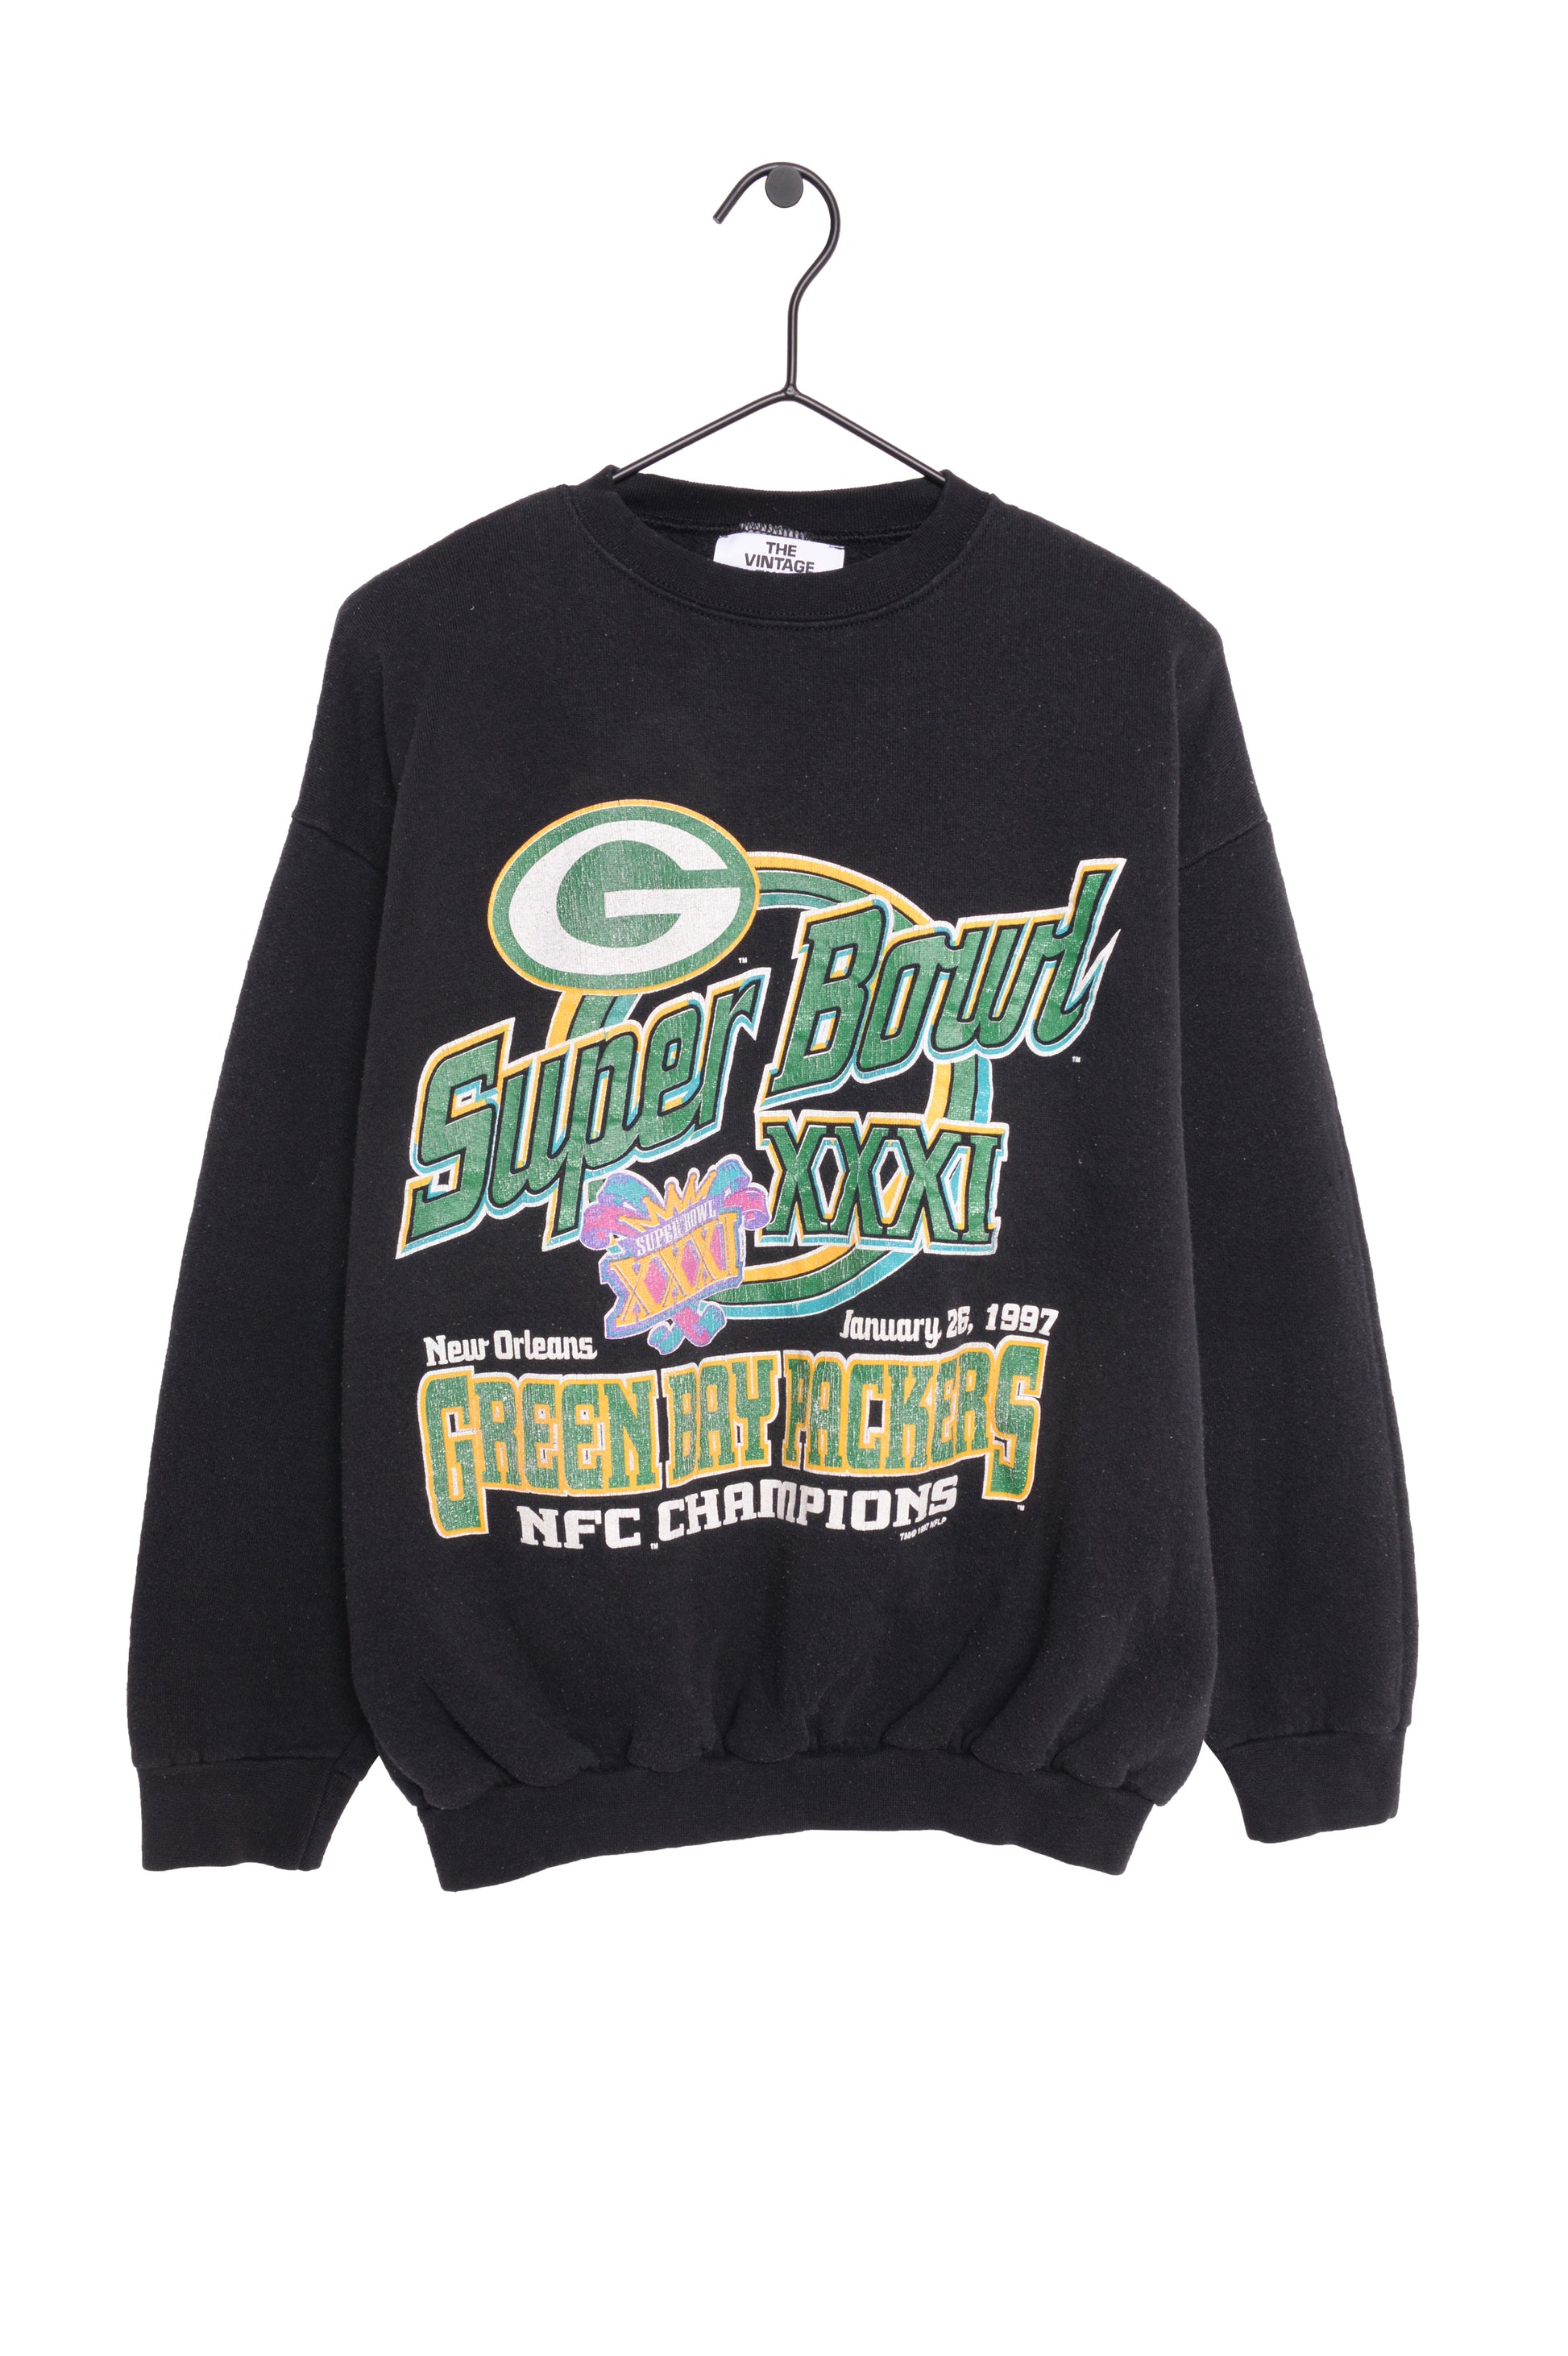 1997 Green Bay Packers Super Bowl Sweatshirt USA – The Vintage Twin